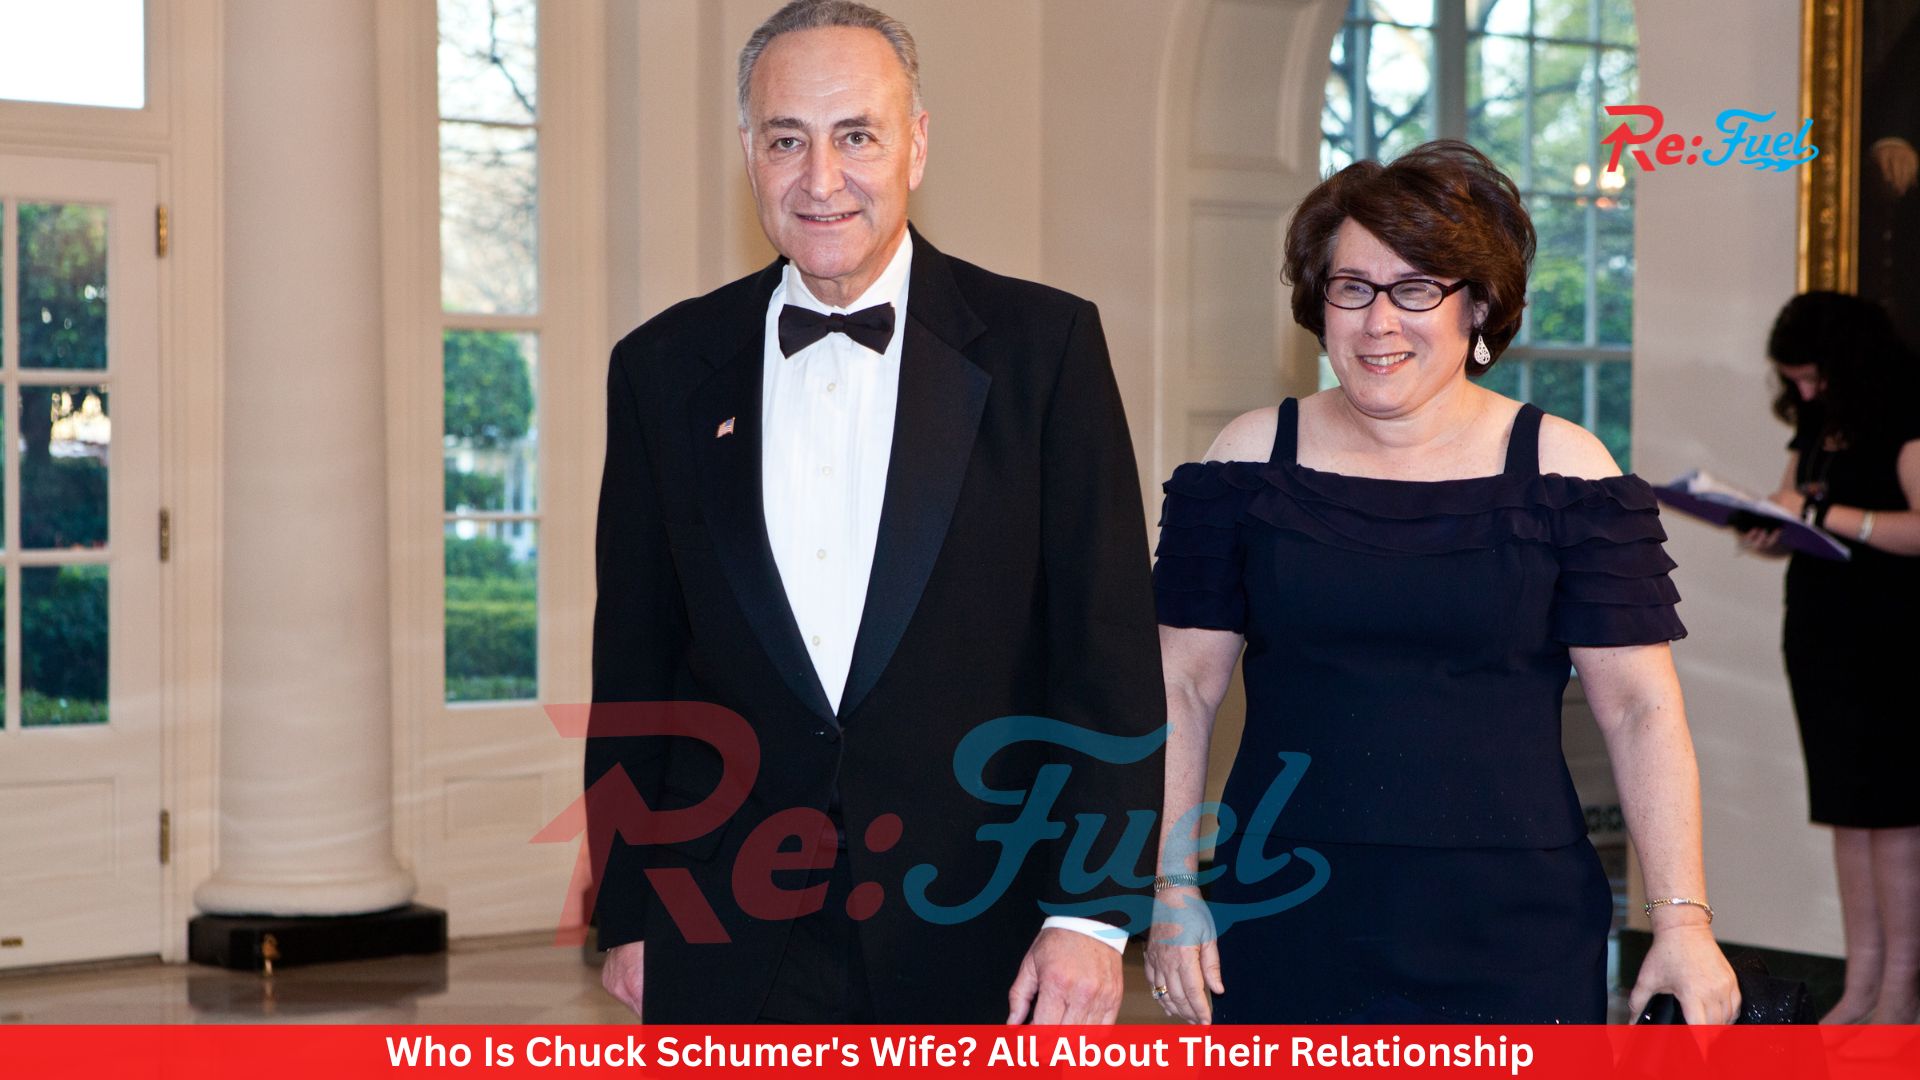 Who Is Chuck Schumer's Wife? All About Their Relationship